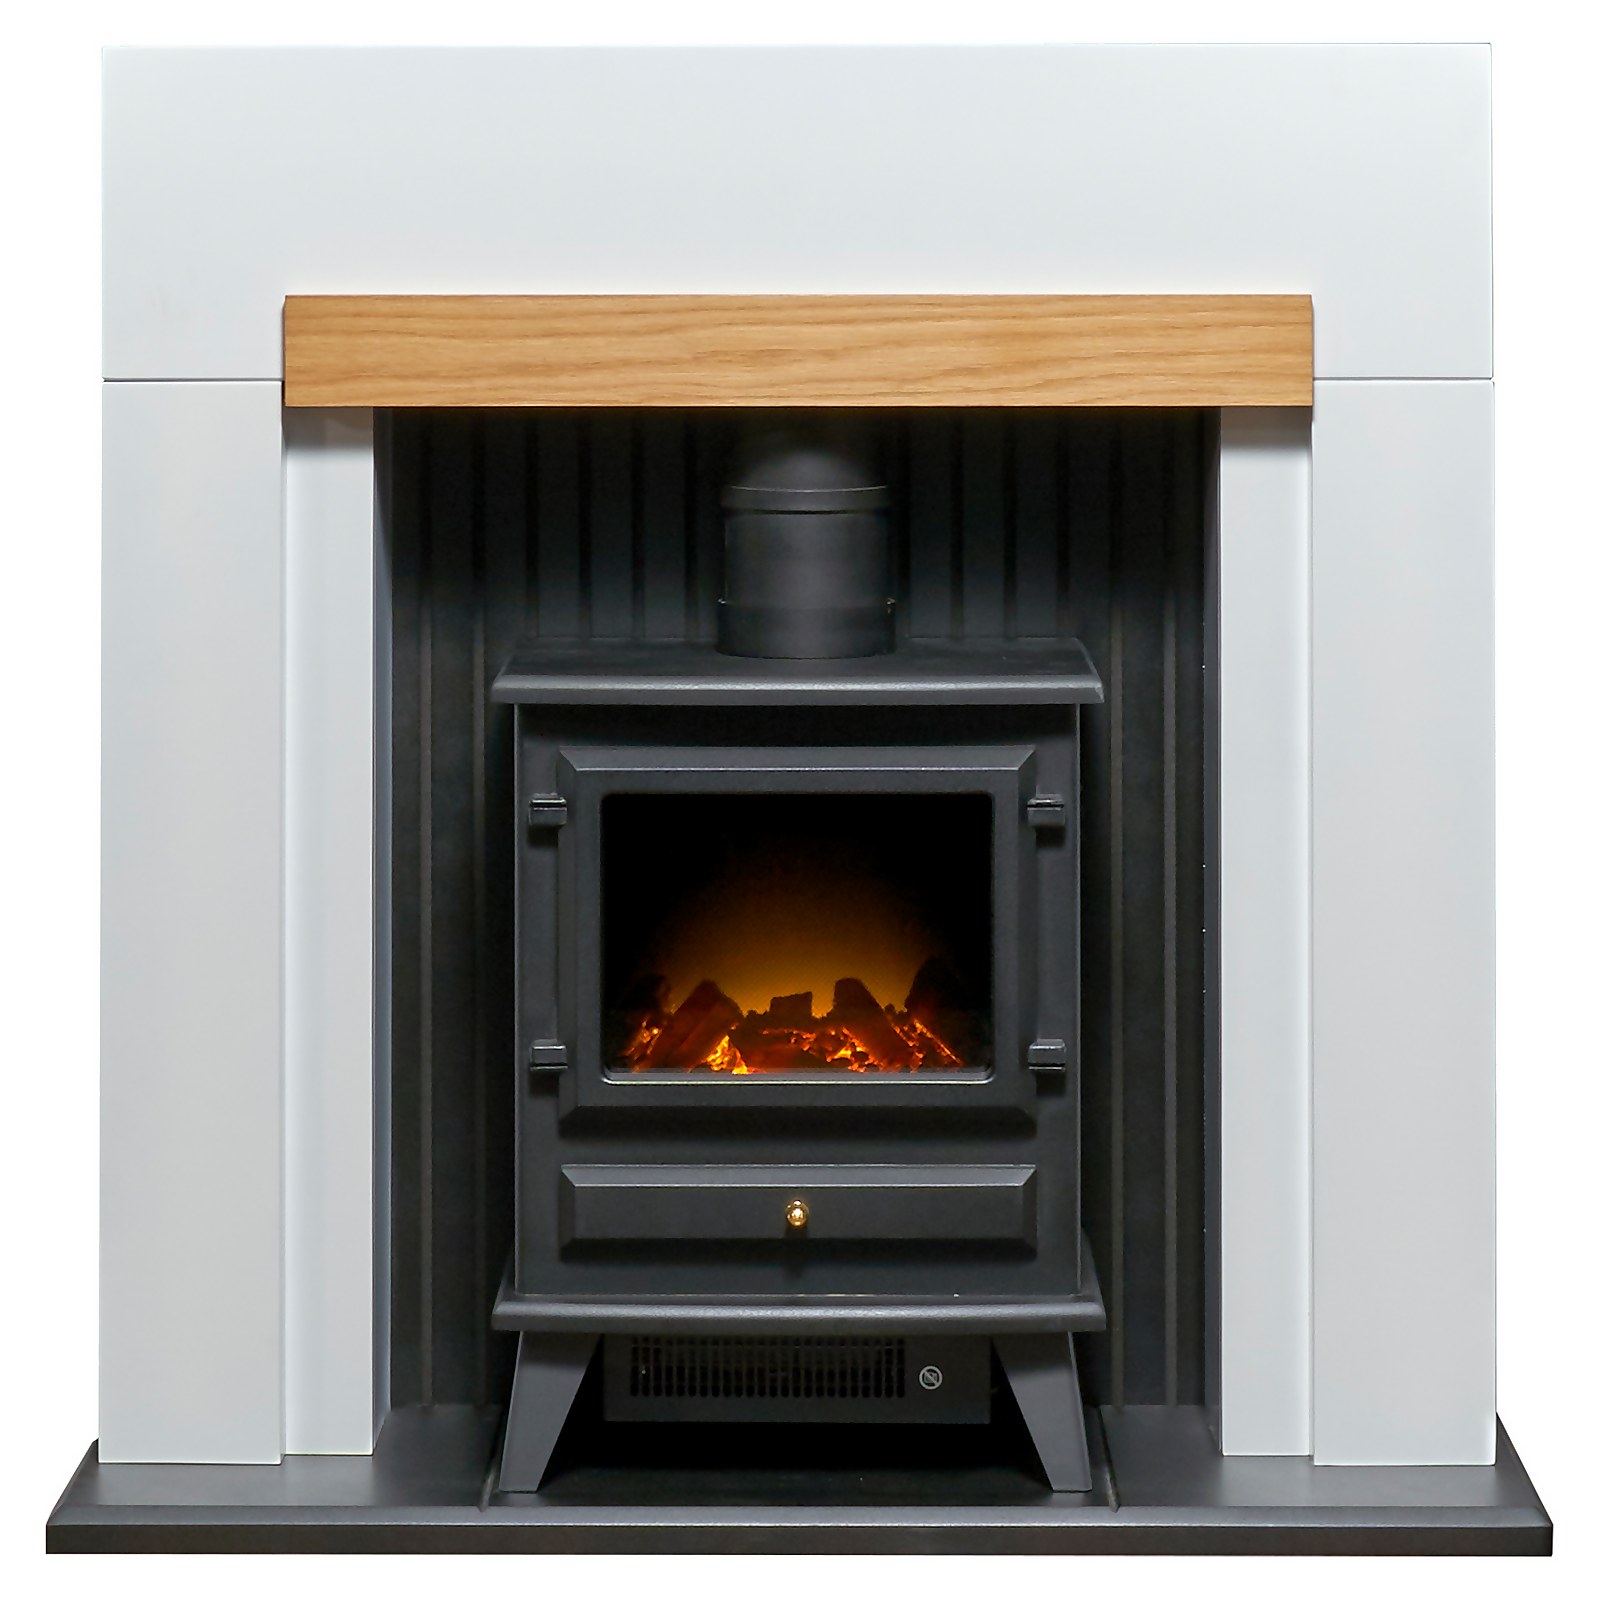 Adam Salzburg Fireplace Surround & Hudson Electric Stove with Flat to Wall Fitting - Oak & Black